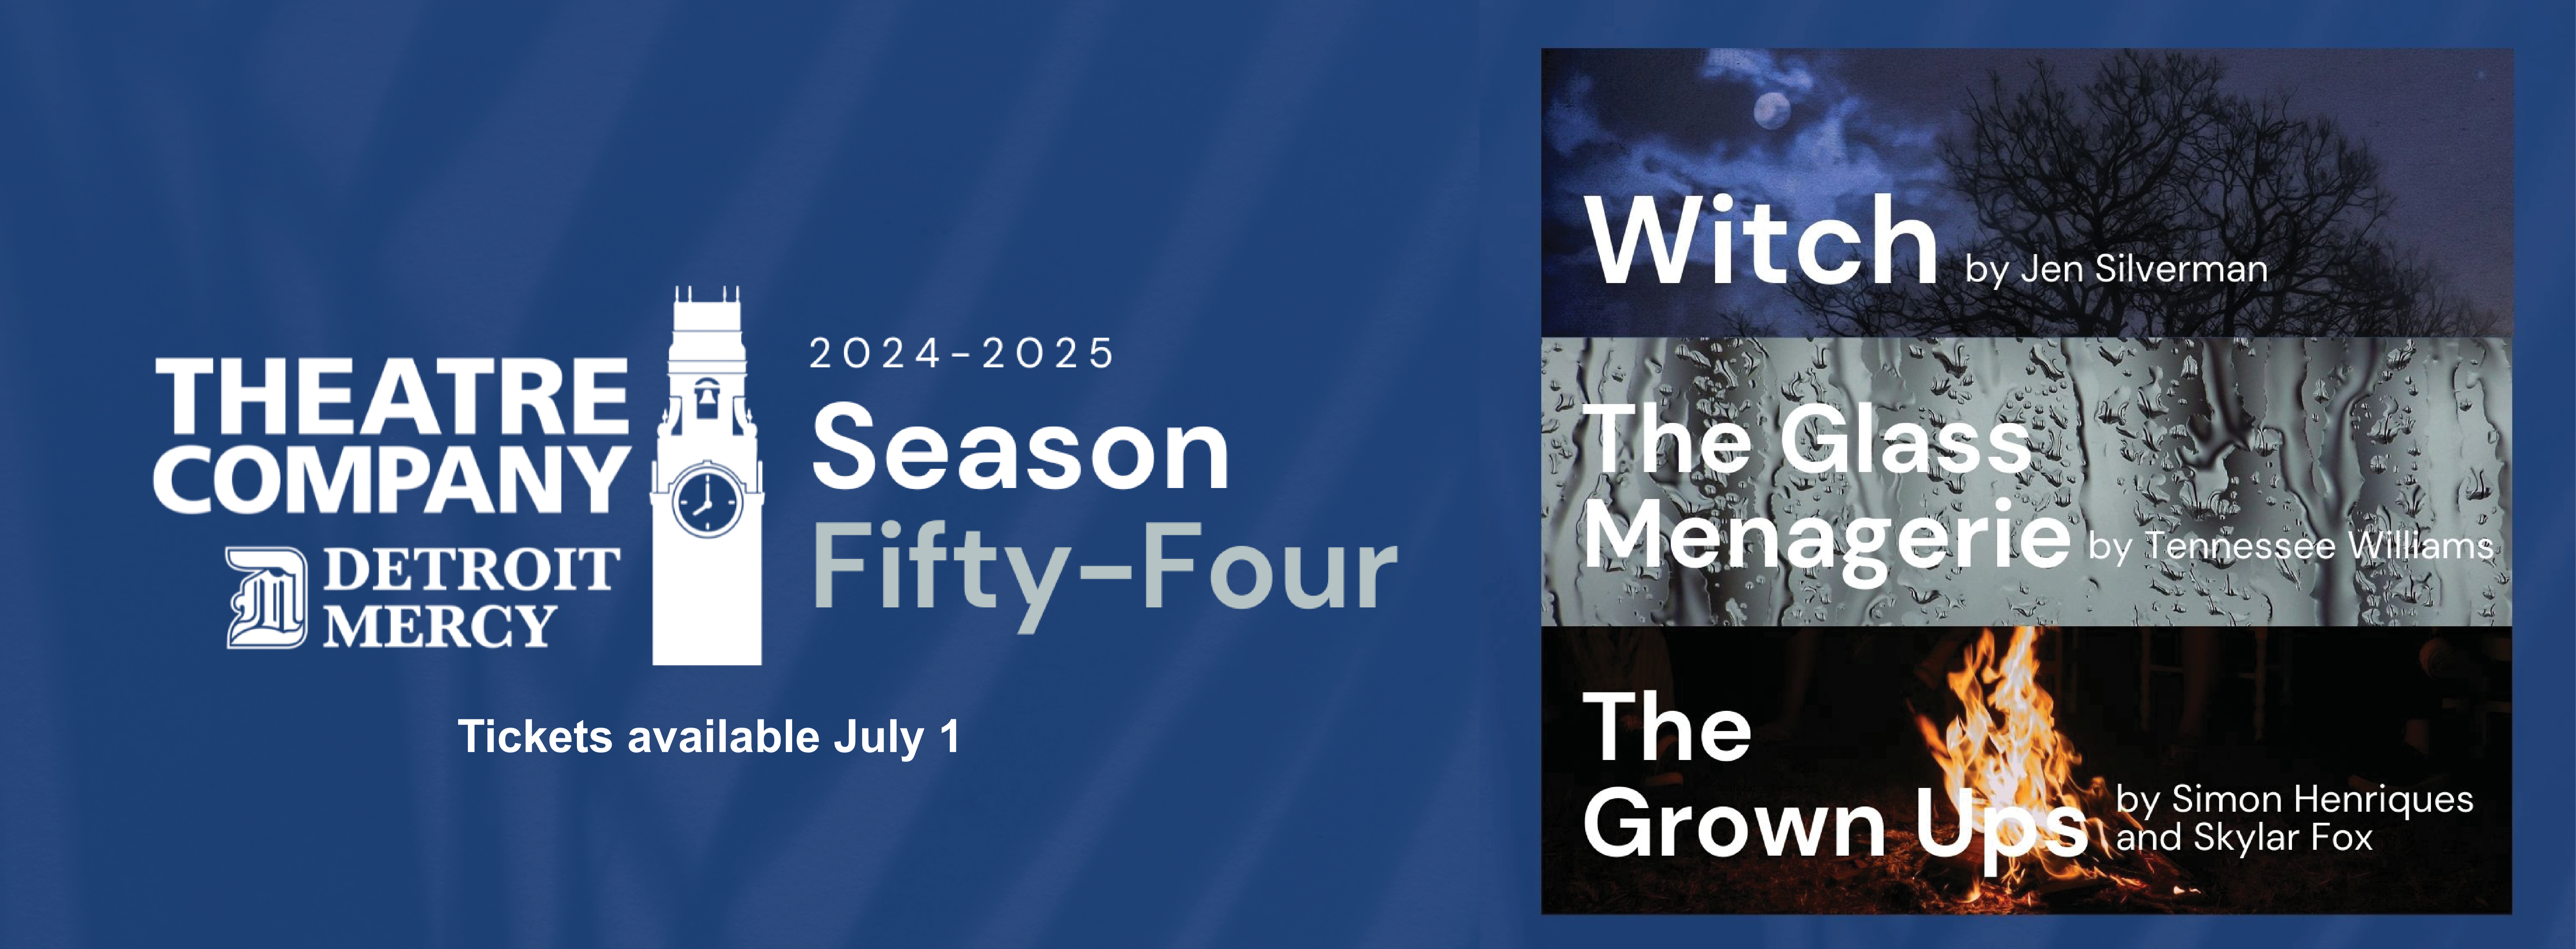 Theatre Company Logo. 2024-2025 Season 54. Witch by Jen Silverman. The Glass Menagerie by Tennessee Williams. The Grown Ups by Simon and Skylar